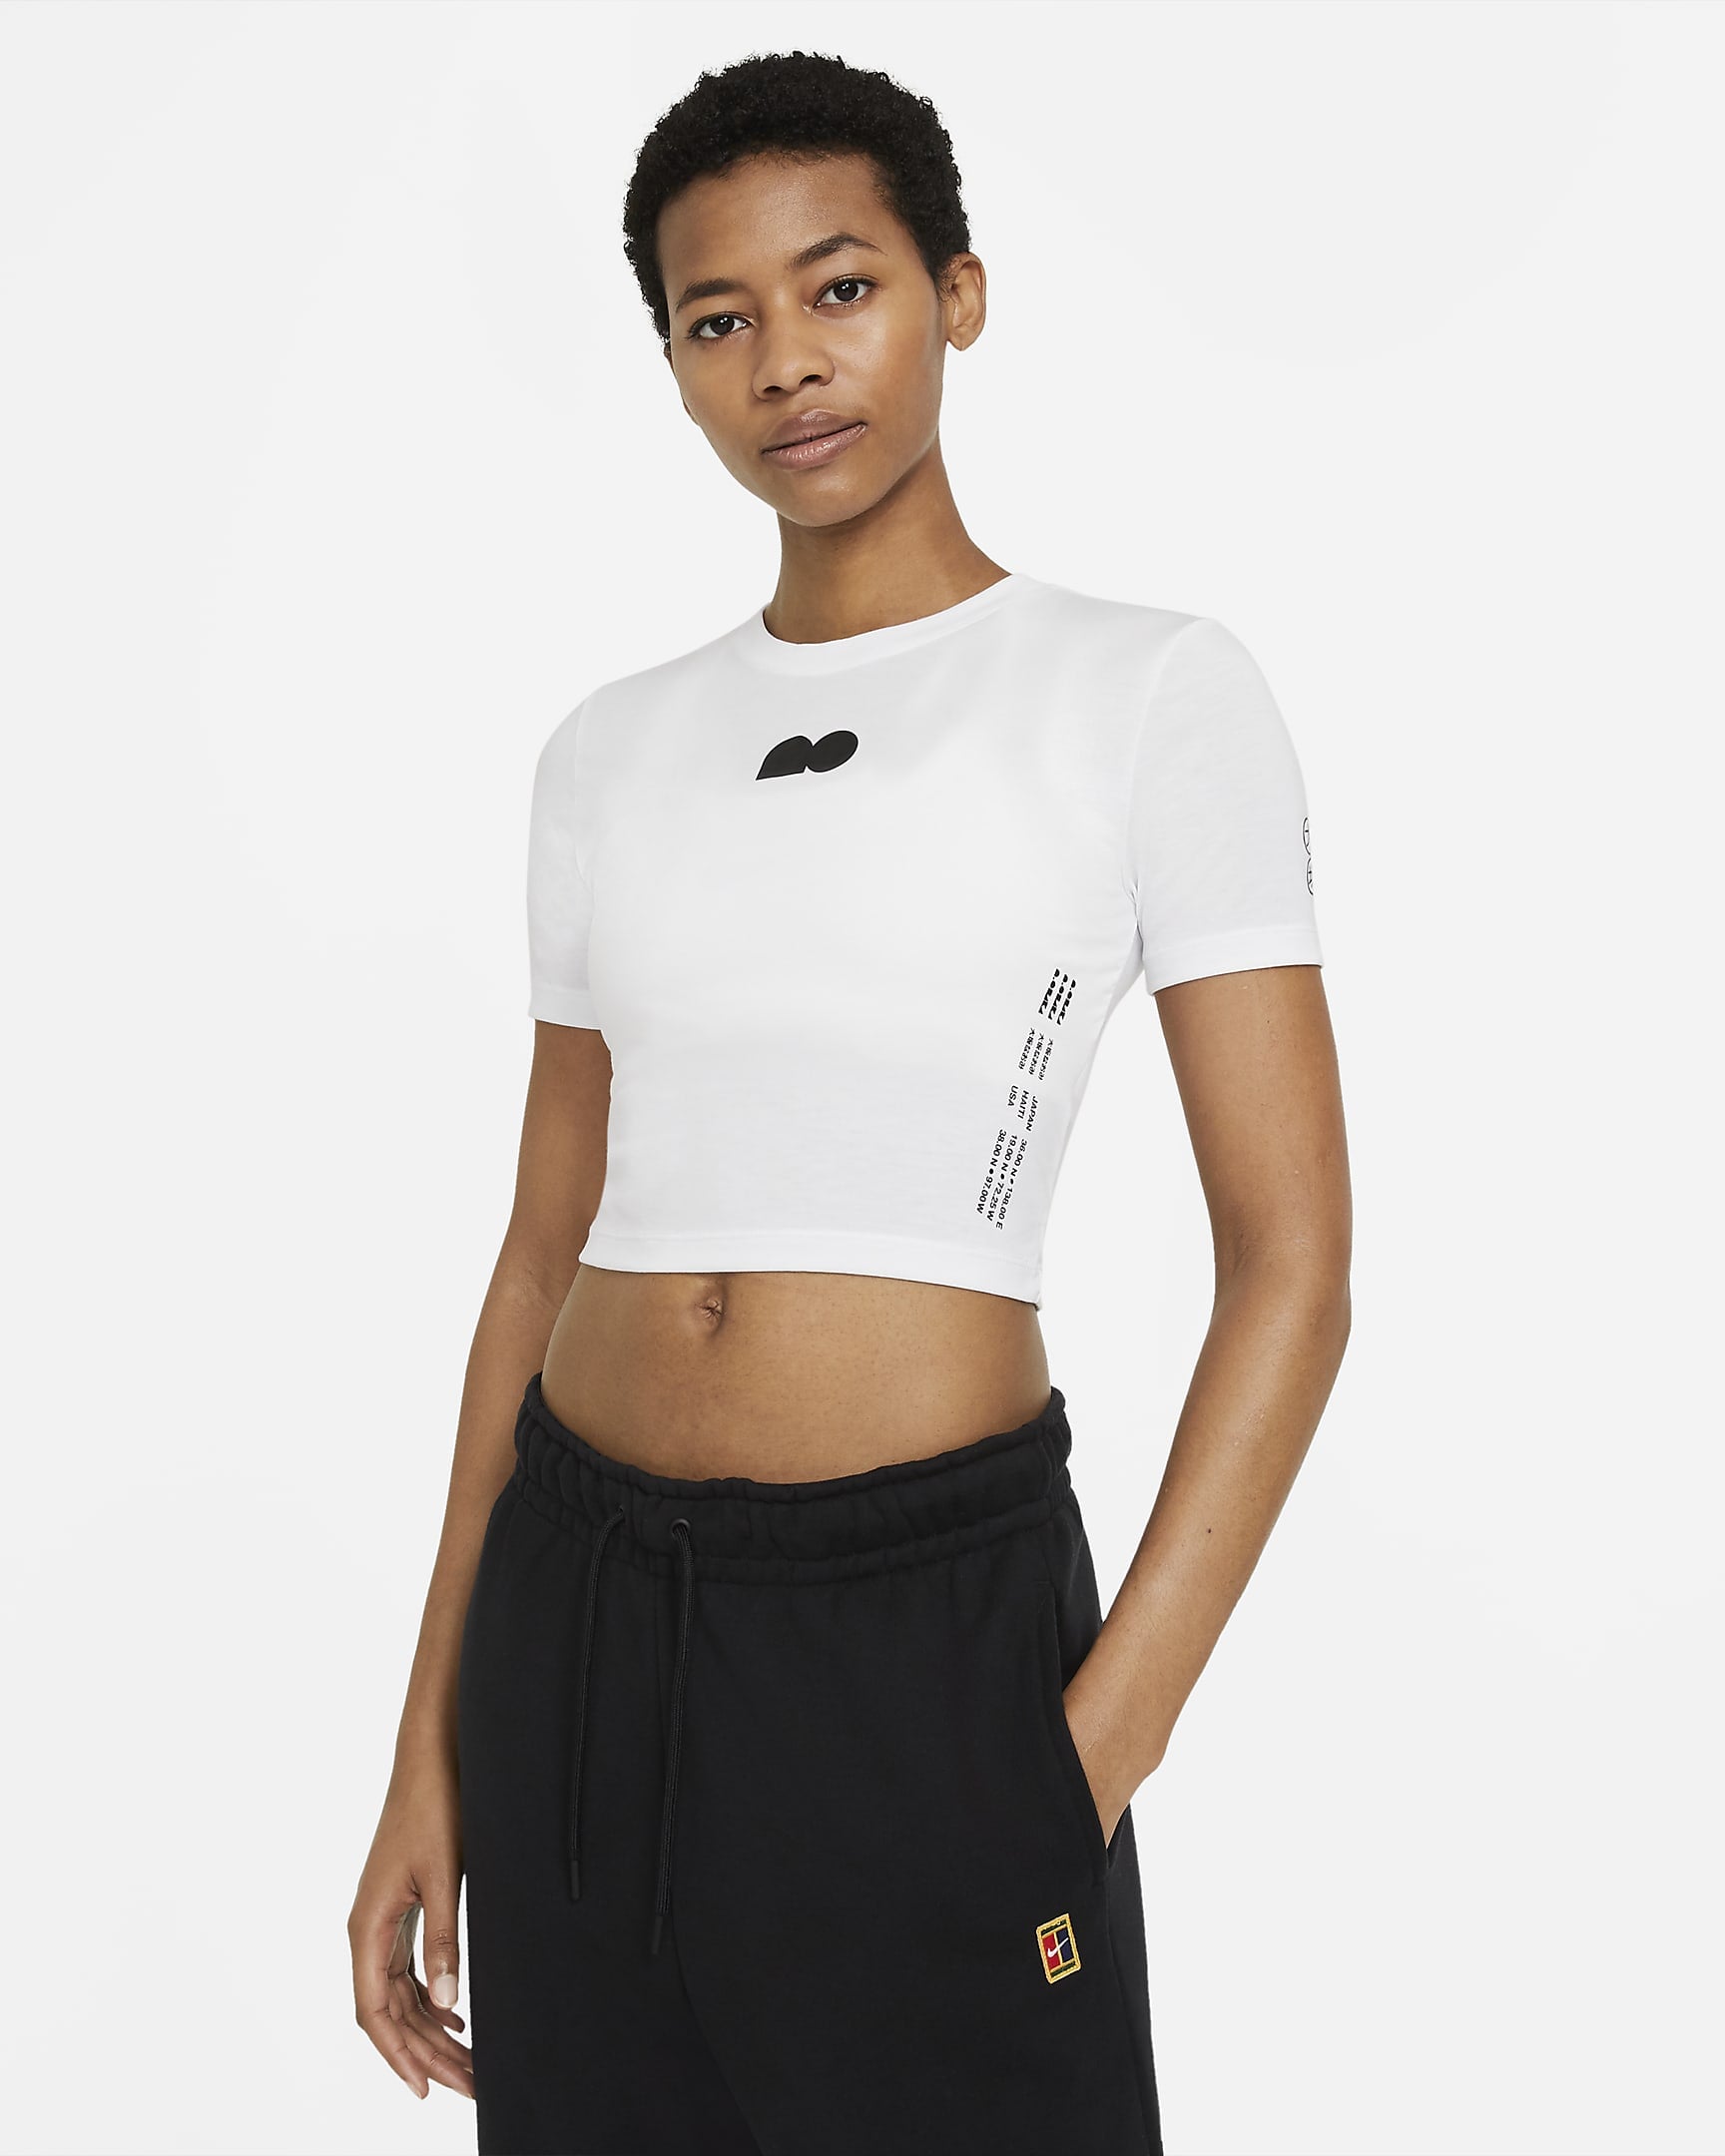 Naomi Osaka Launches New Apparel Collection With Nike Including New Logo –  Pretty Phresh